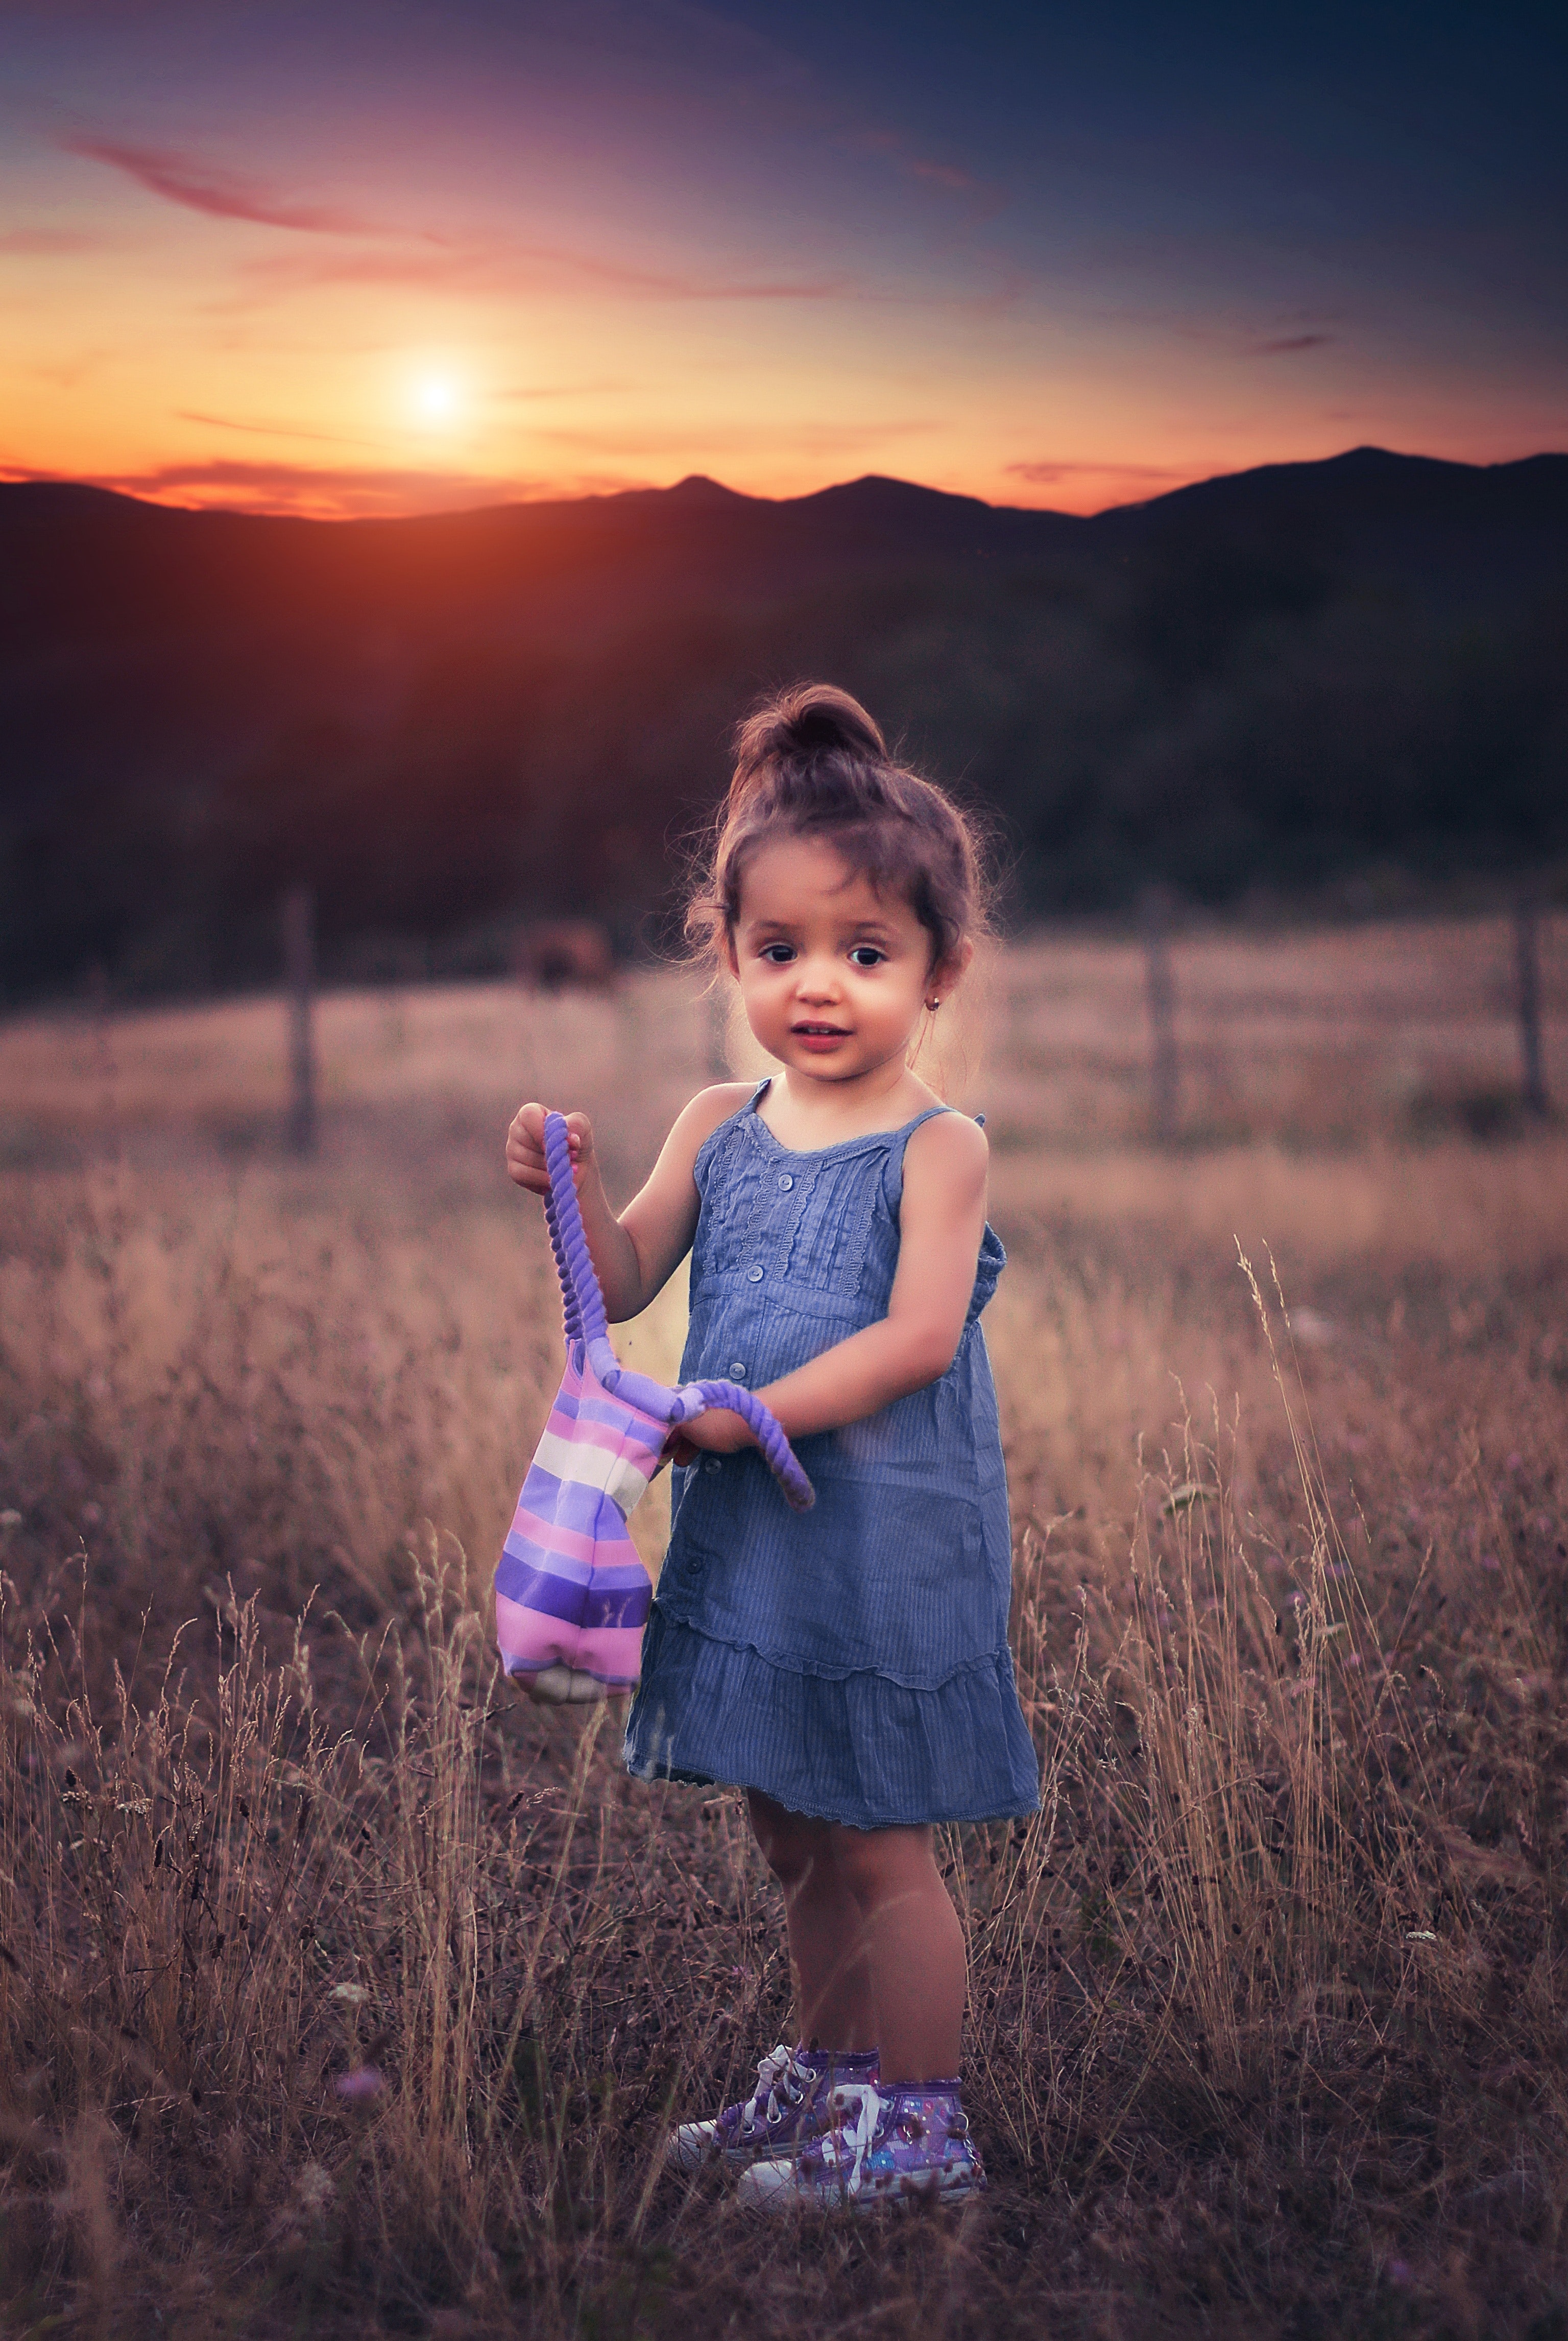 Girl in Blue Dress Standing on Grass Field during Sunset · Free